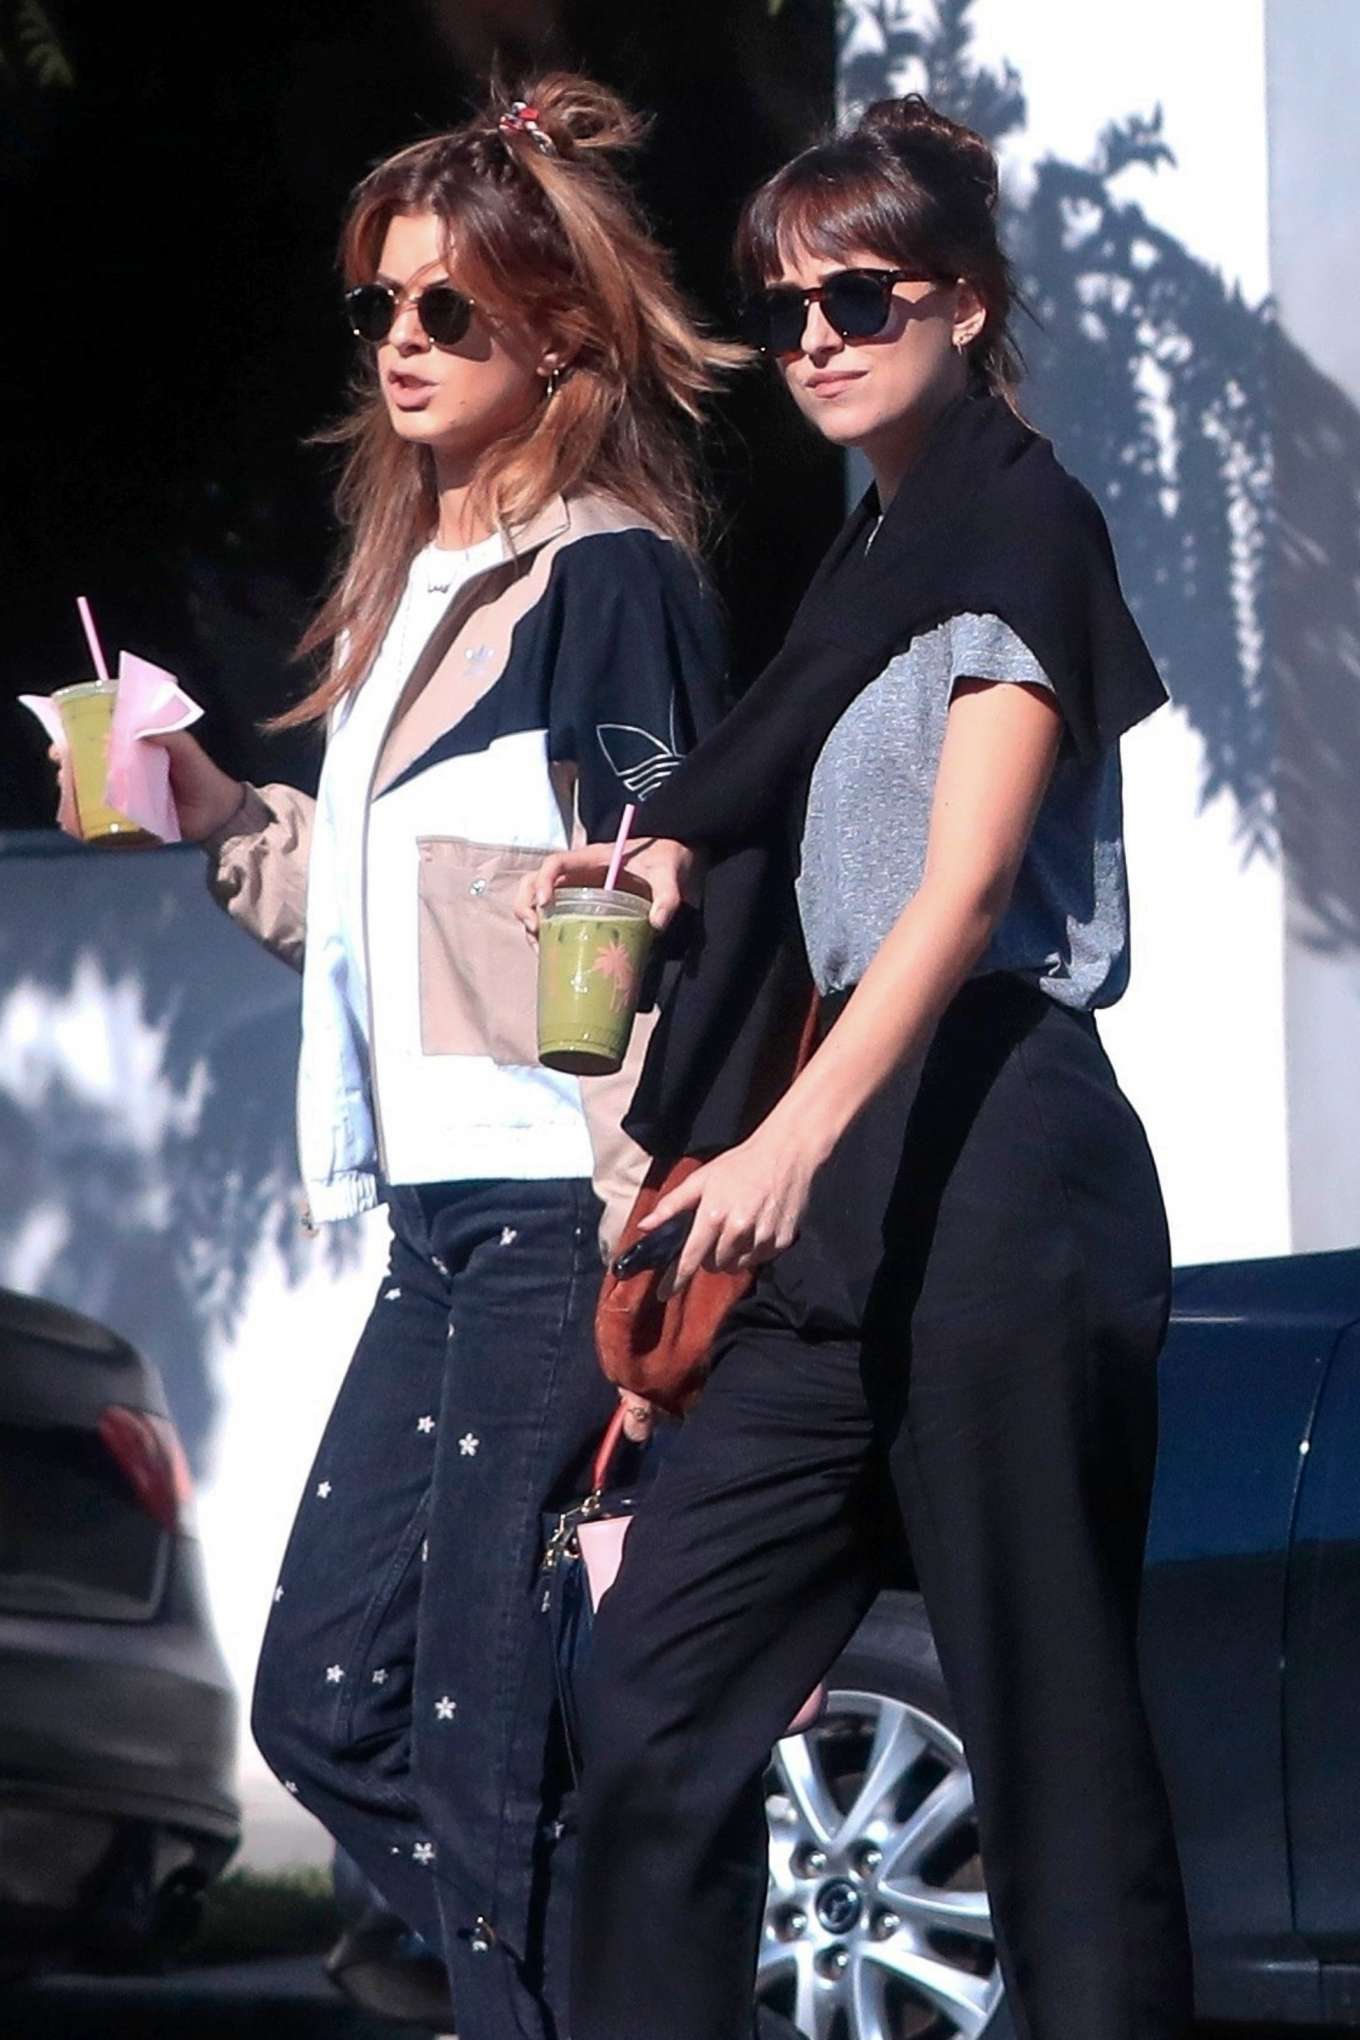 Dakota Johnson and her friend at Cha Cha Matcha in West Hollywood